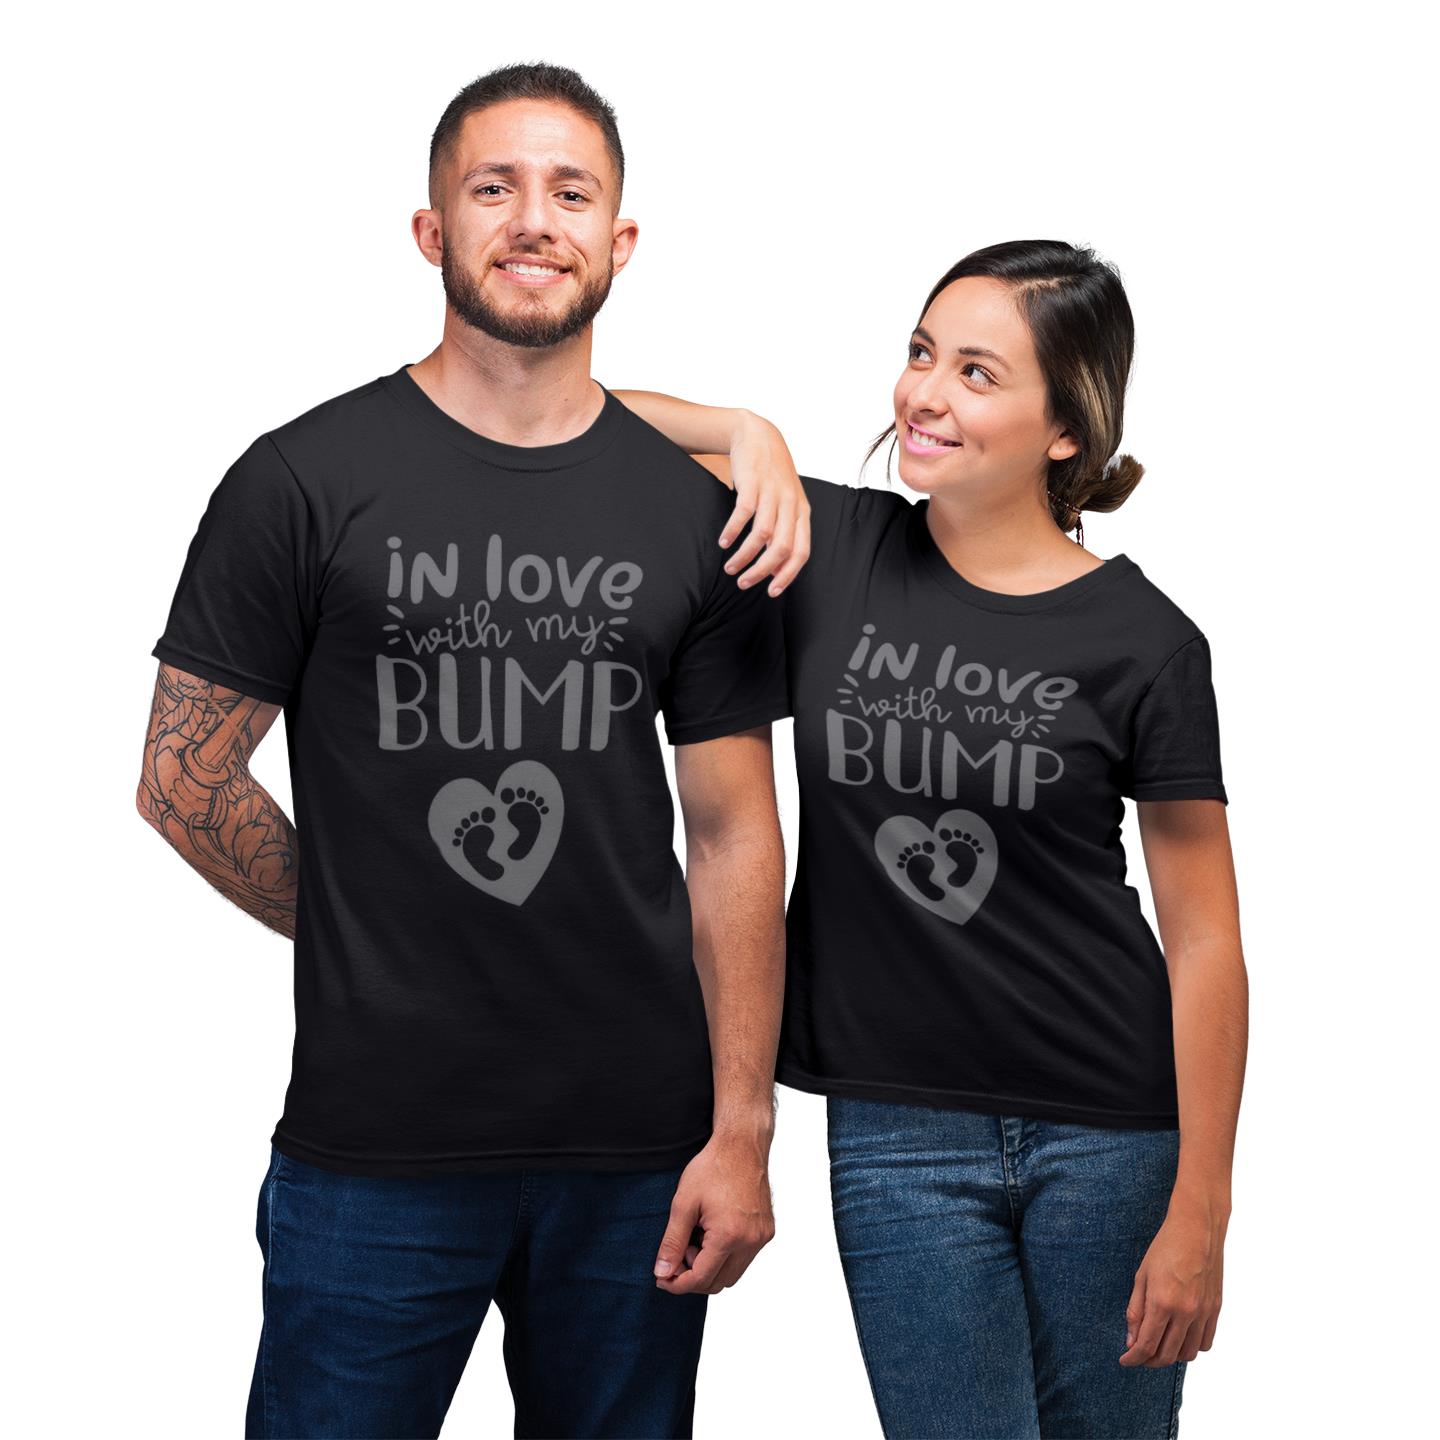 In Love With My Bump Shirt For Couples Lover Matching T-shirt